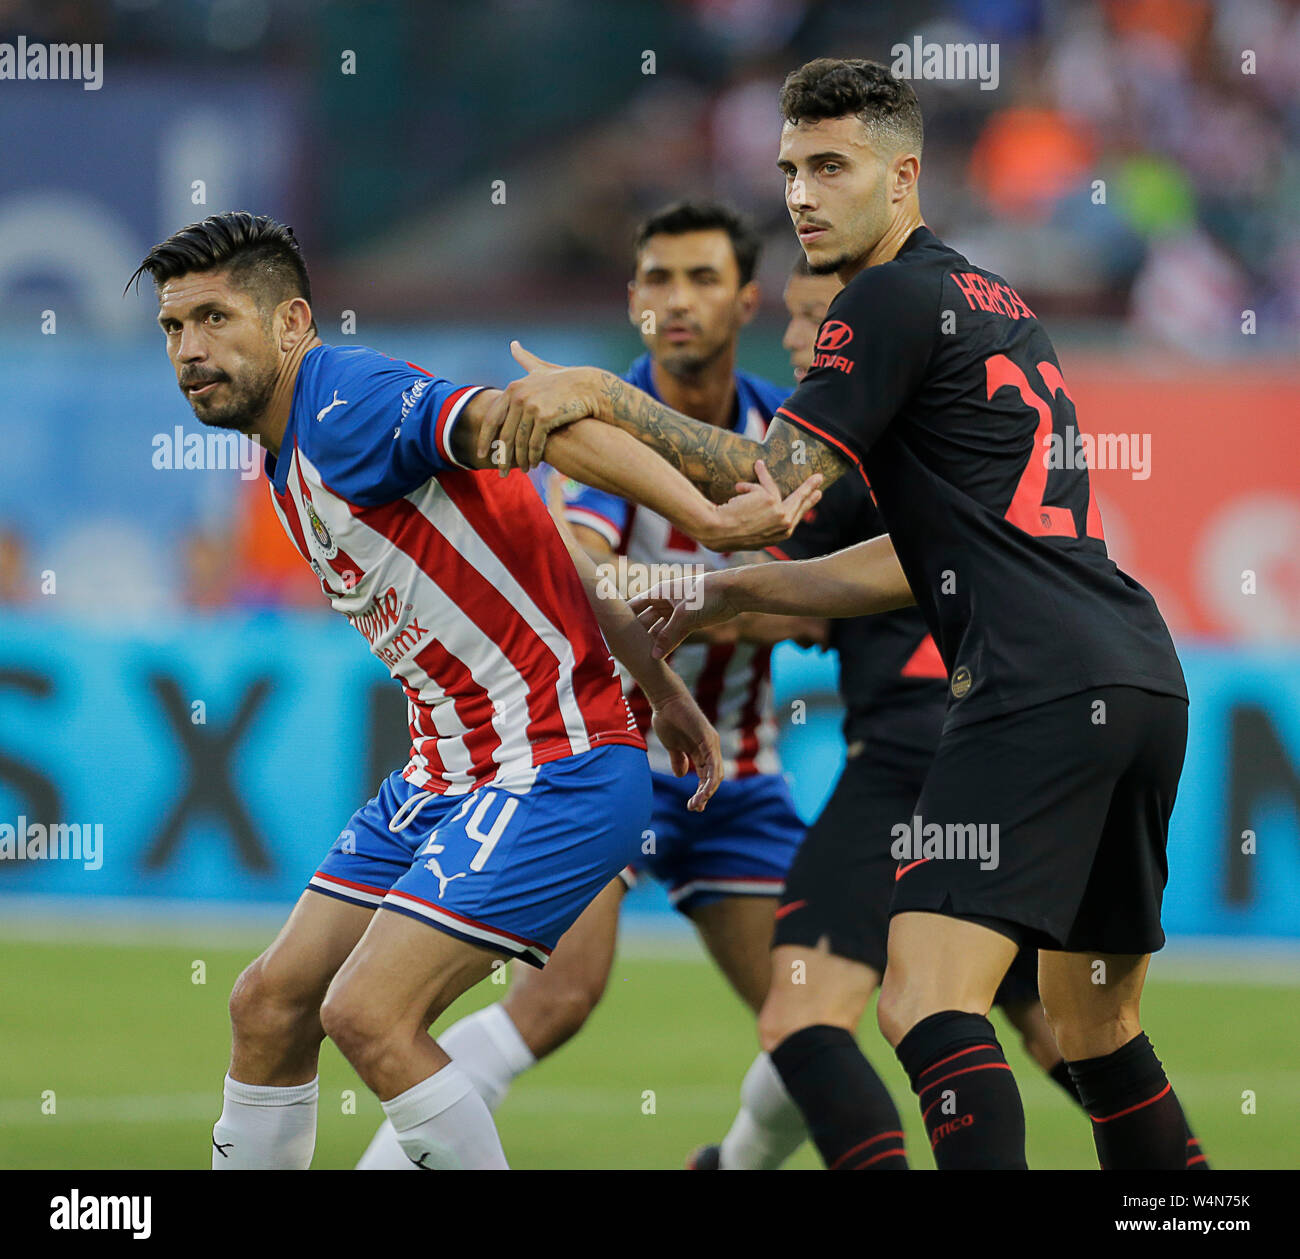 Arlington, Texas, USA. 23rd July, 2019. July 23, 2019, Arlington, Texas, United States; Oribe Peralta (24) and Mano Hermosa (22) fight for position on a corner kick during the International Champions Cup match between Chivas de Guadalajara and AtlÅ½tico de Madrid at Globe Life Park in Arlington, Tx. Credit: Ralph Lauer/ZUMA Wire/Alamy Live News Stock Photo